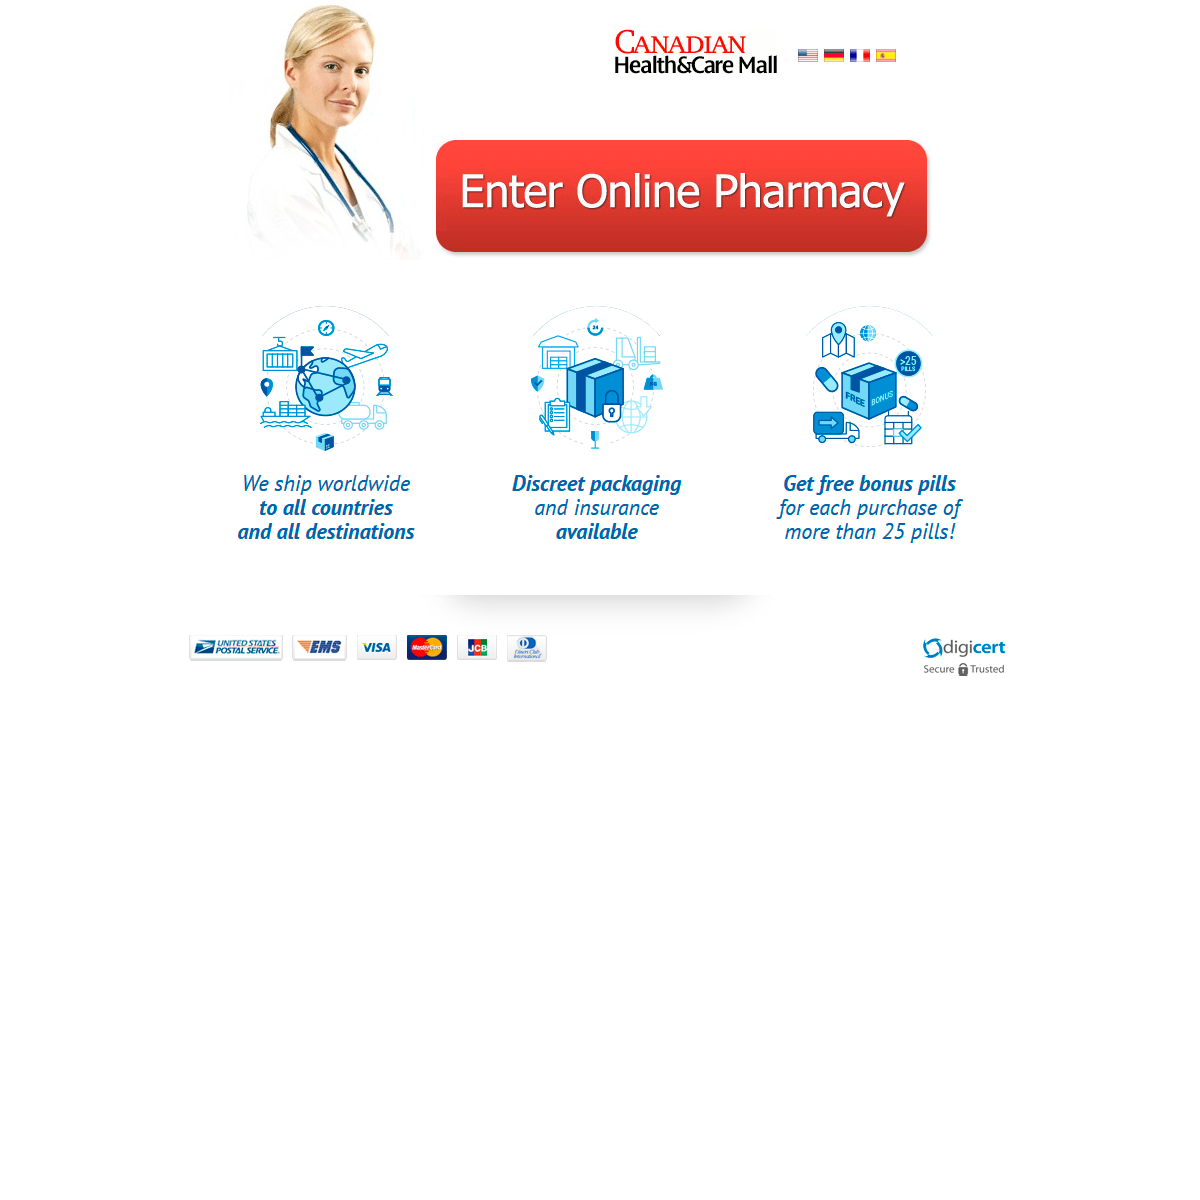 A complete backup of canadianonlinepharmacyelite.com